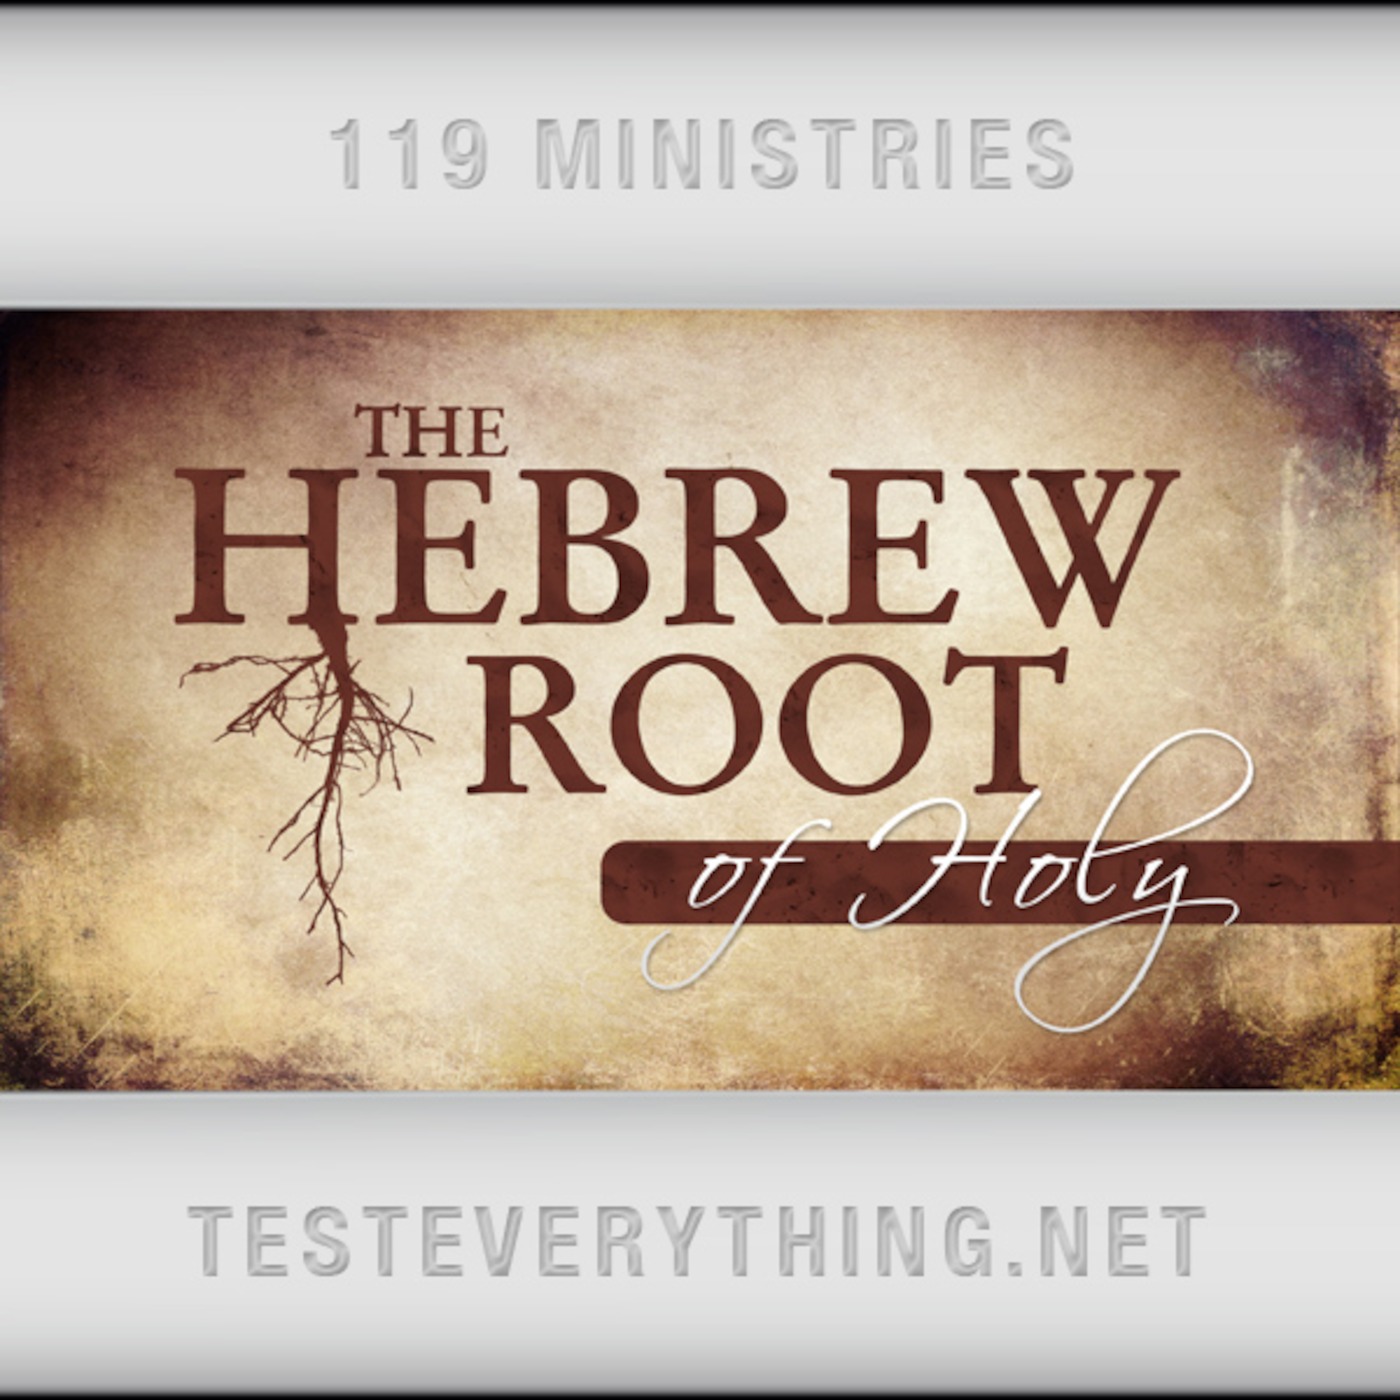 The Hebrew Root of: Holy